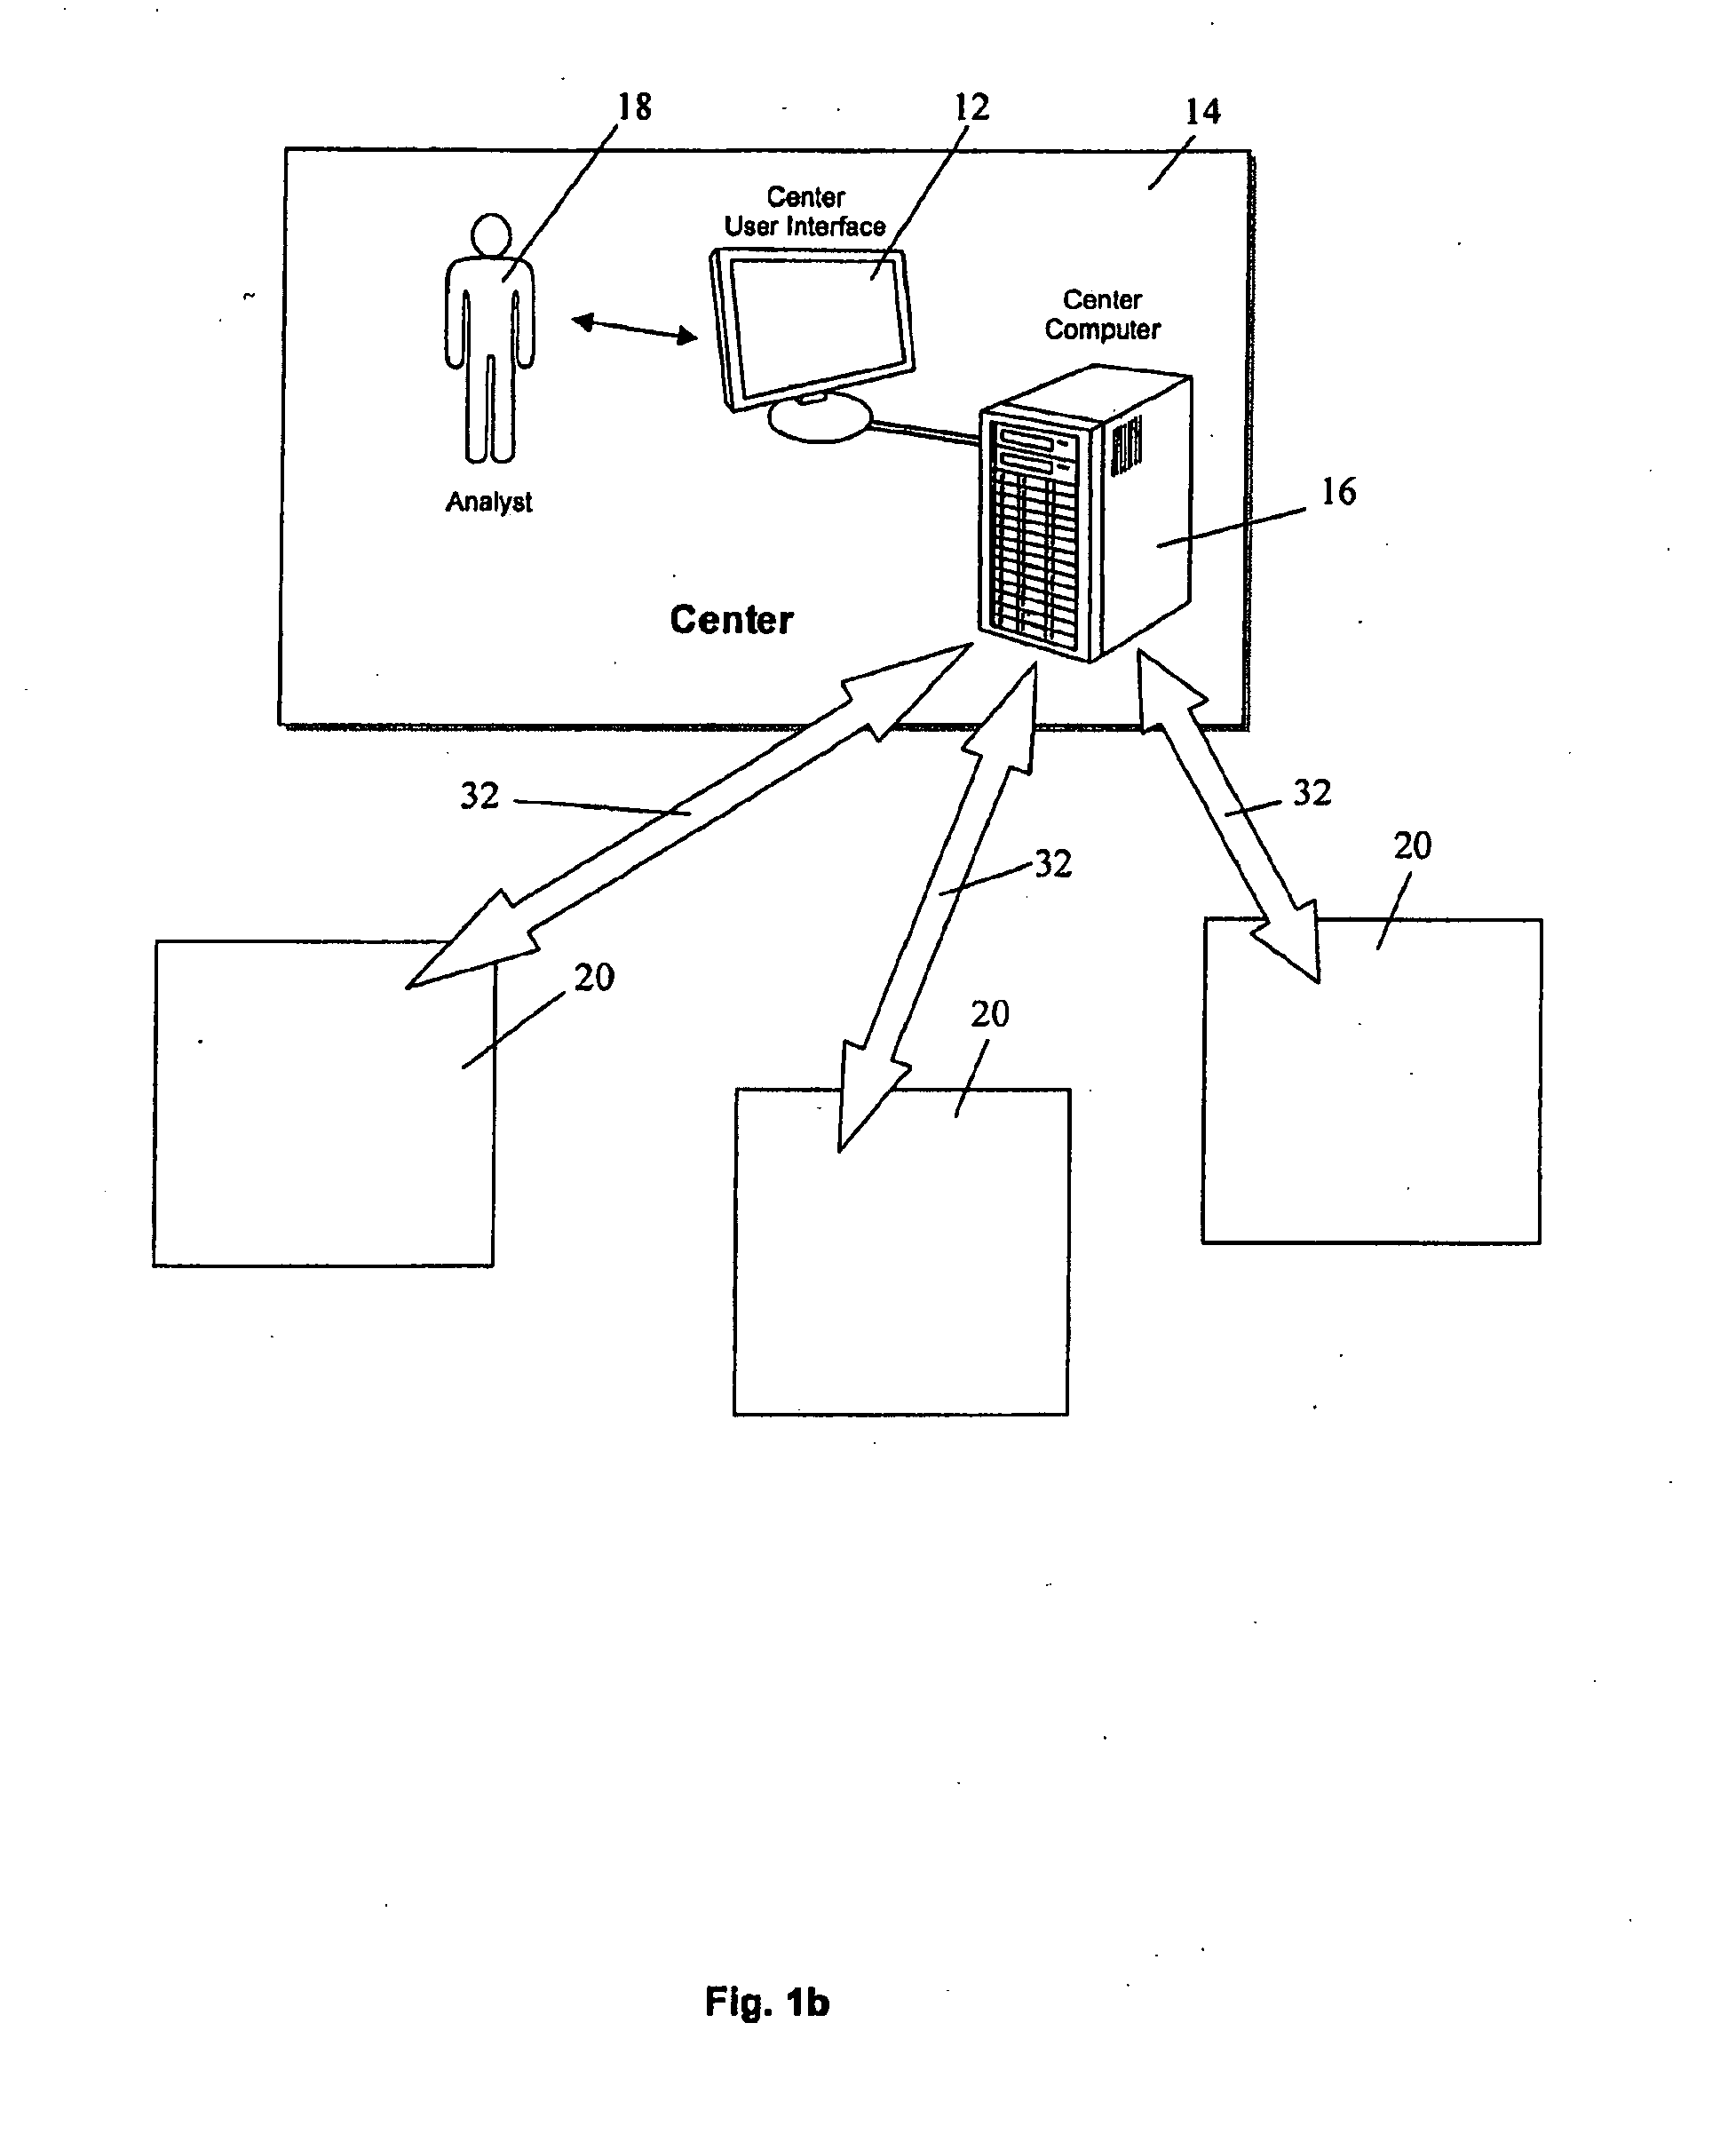 Apparatus and method for remote assessment and therapy management in medical devices via interface systems